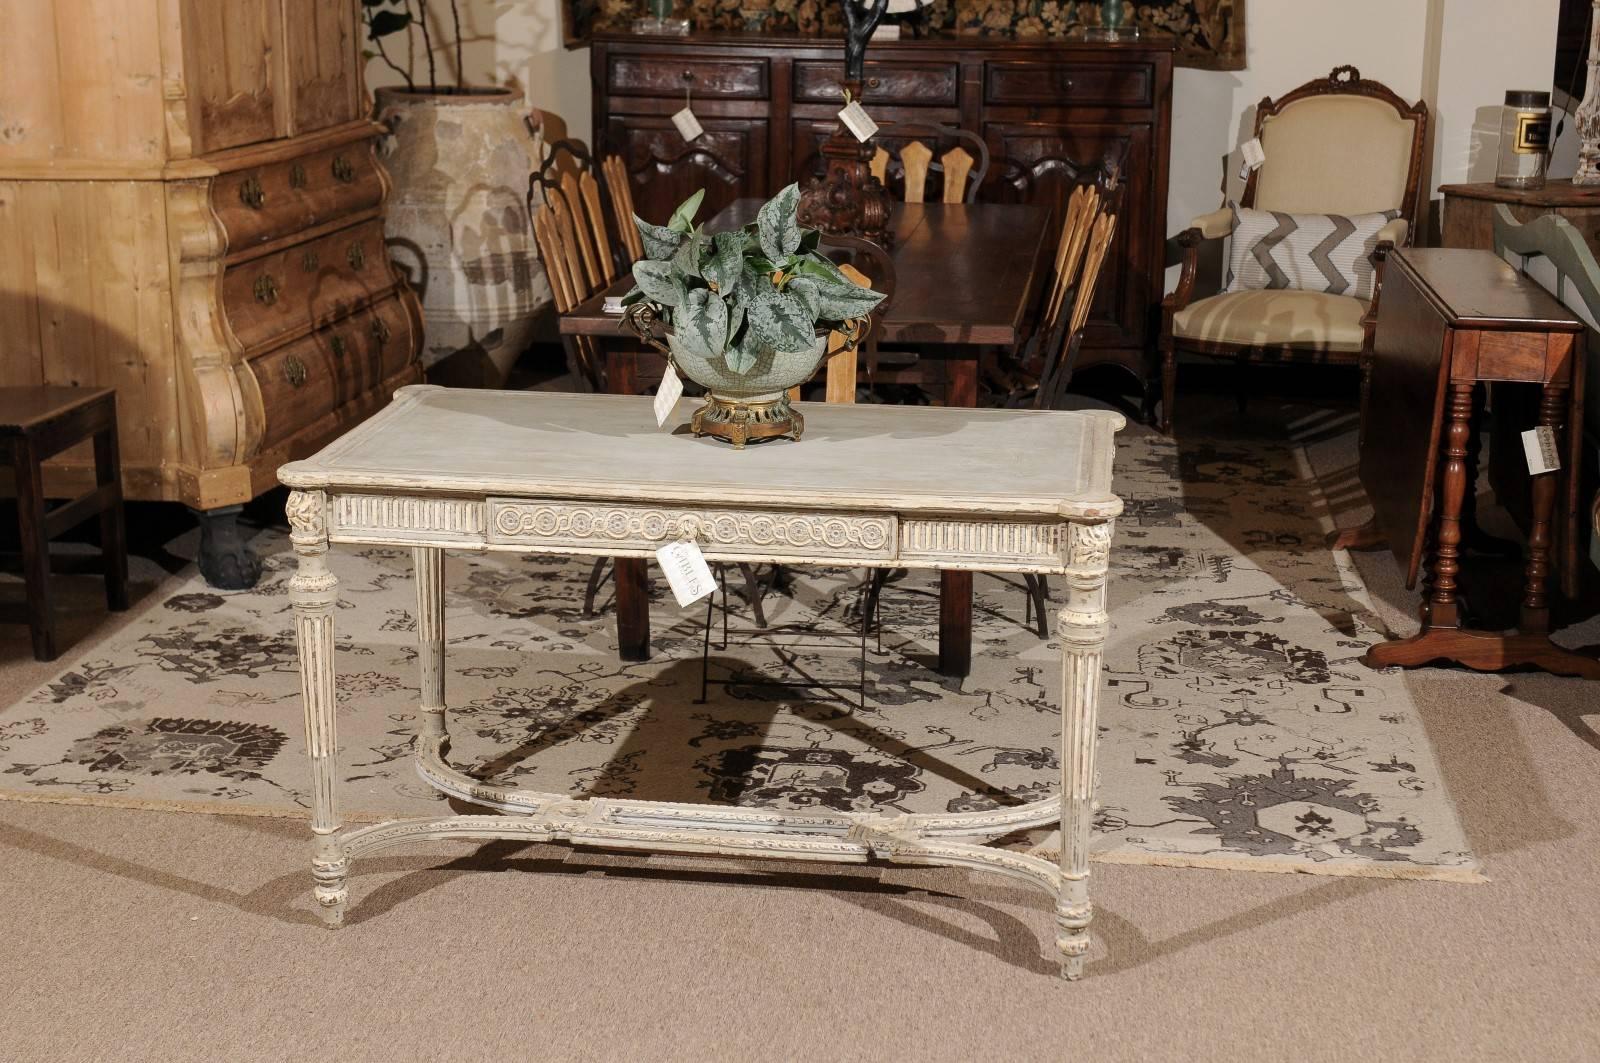 19th century Louis XVI style painted center table

This wonderful carved center table began life as a dark oak piece but was brought up to date with a very well done painted finish. We bought it already painted in the area of France near Belgium and